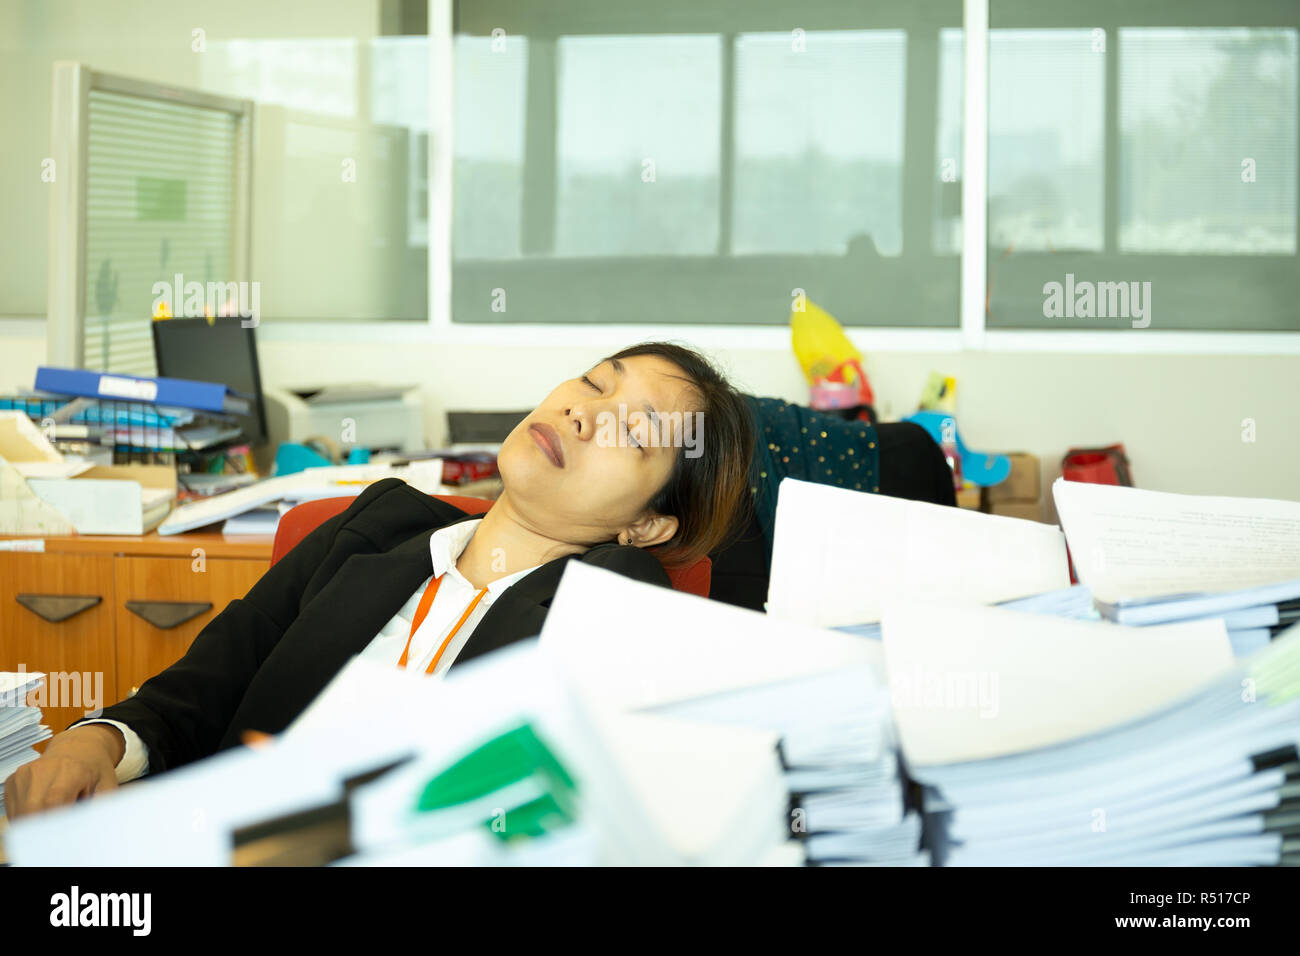 Exhausted Businesswoman Sleeping On Desk In Office With Pile Of